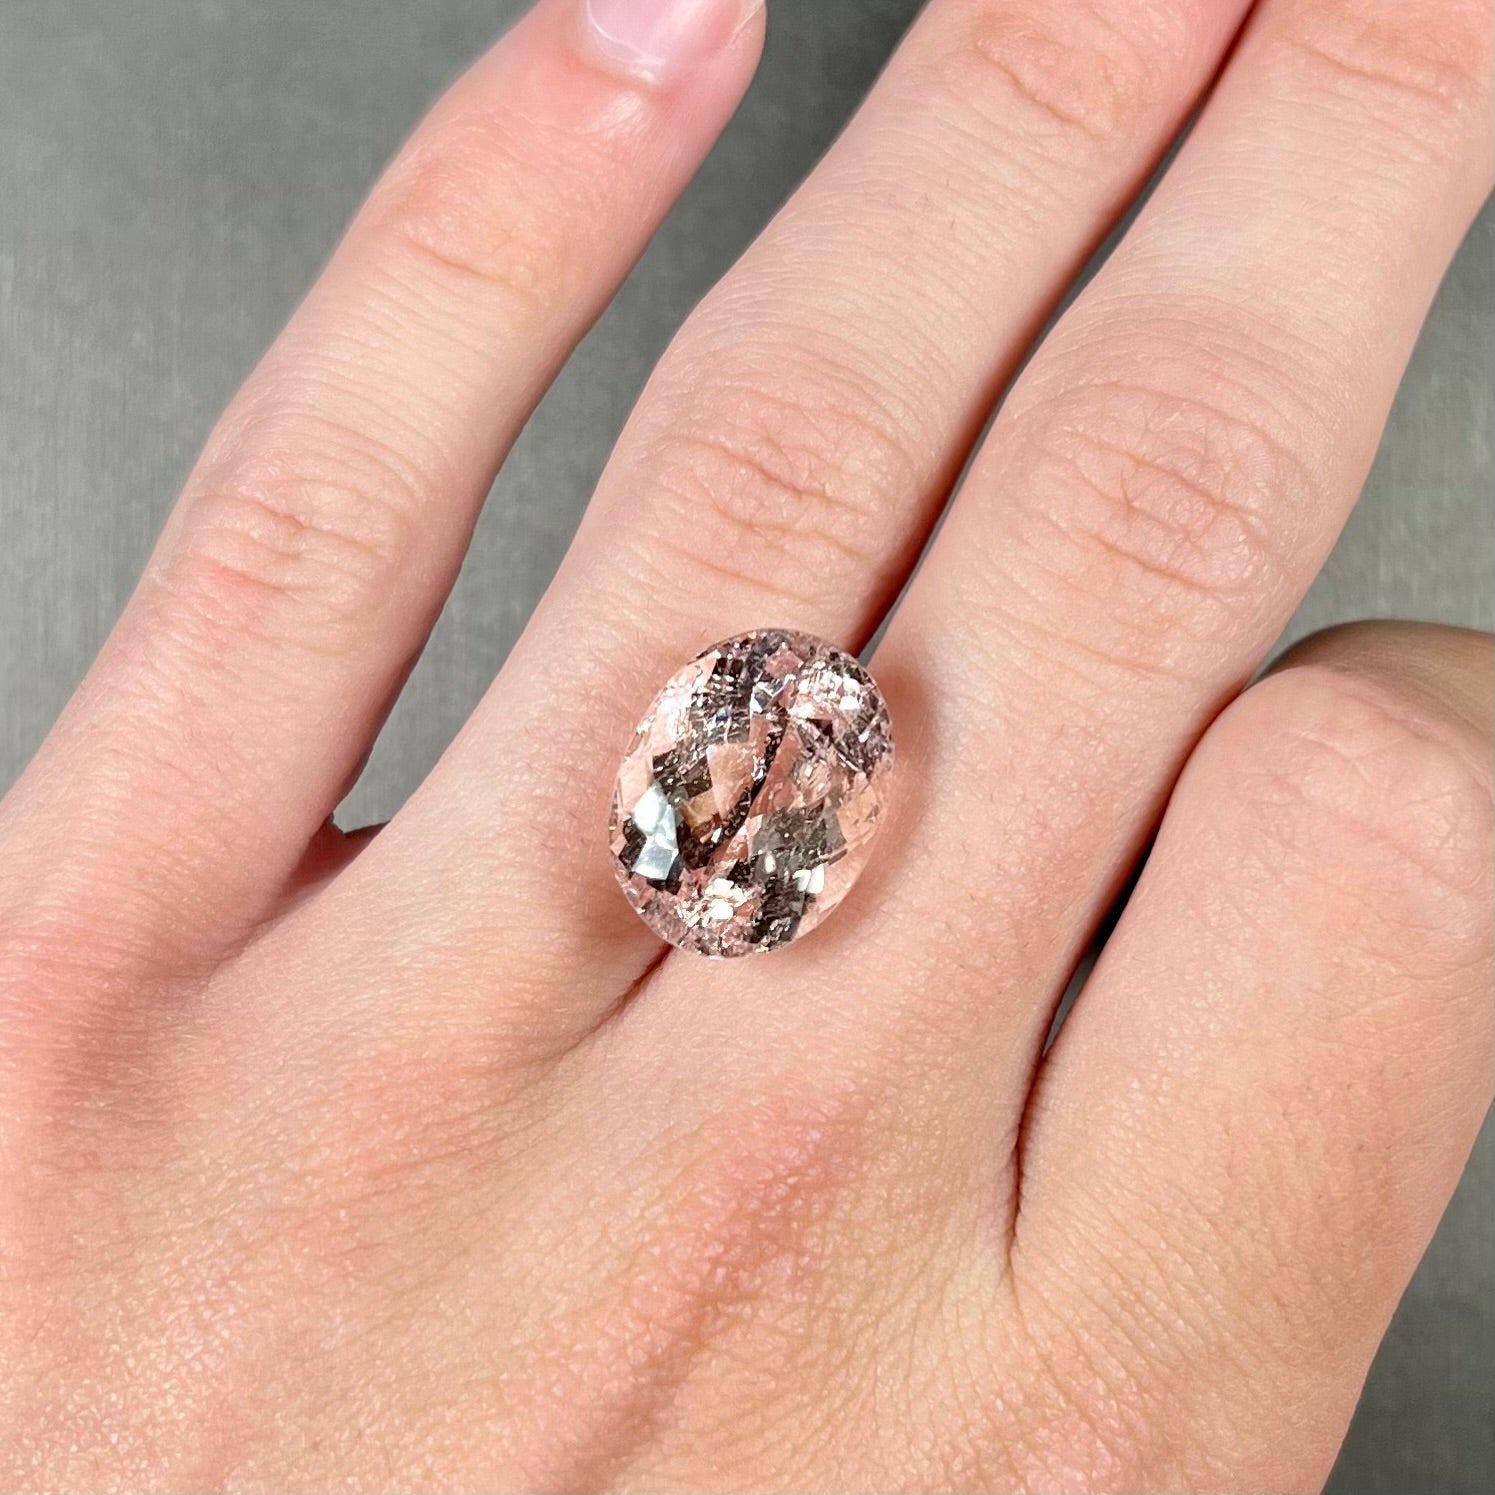 A loose, faceted oval cut pink morganite stone weighing over 14 carats.